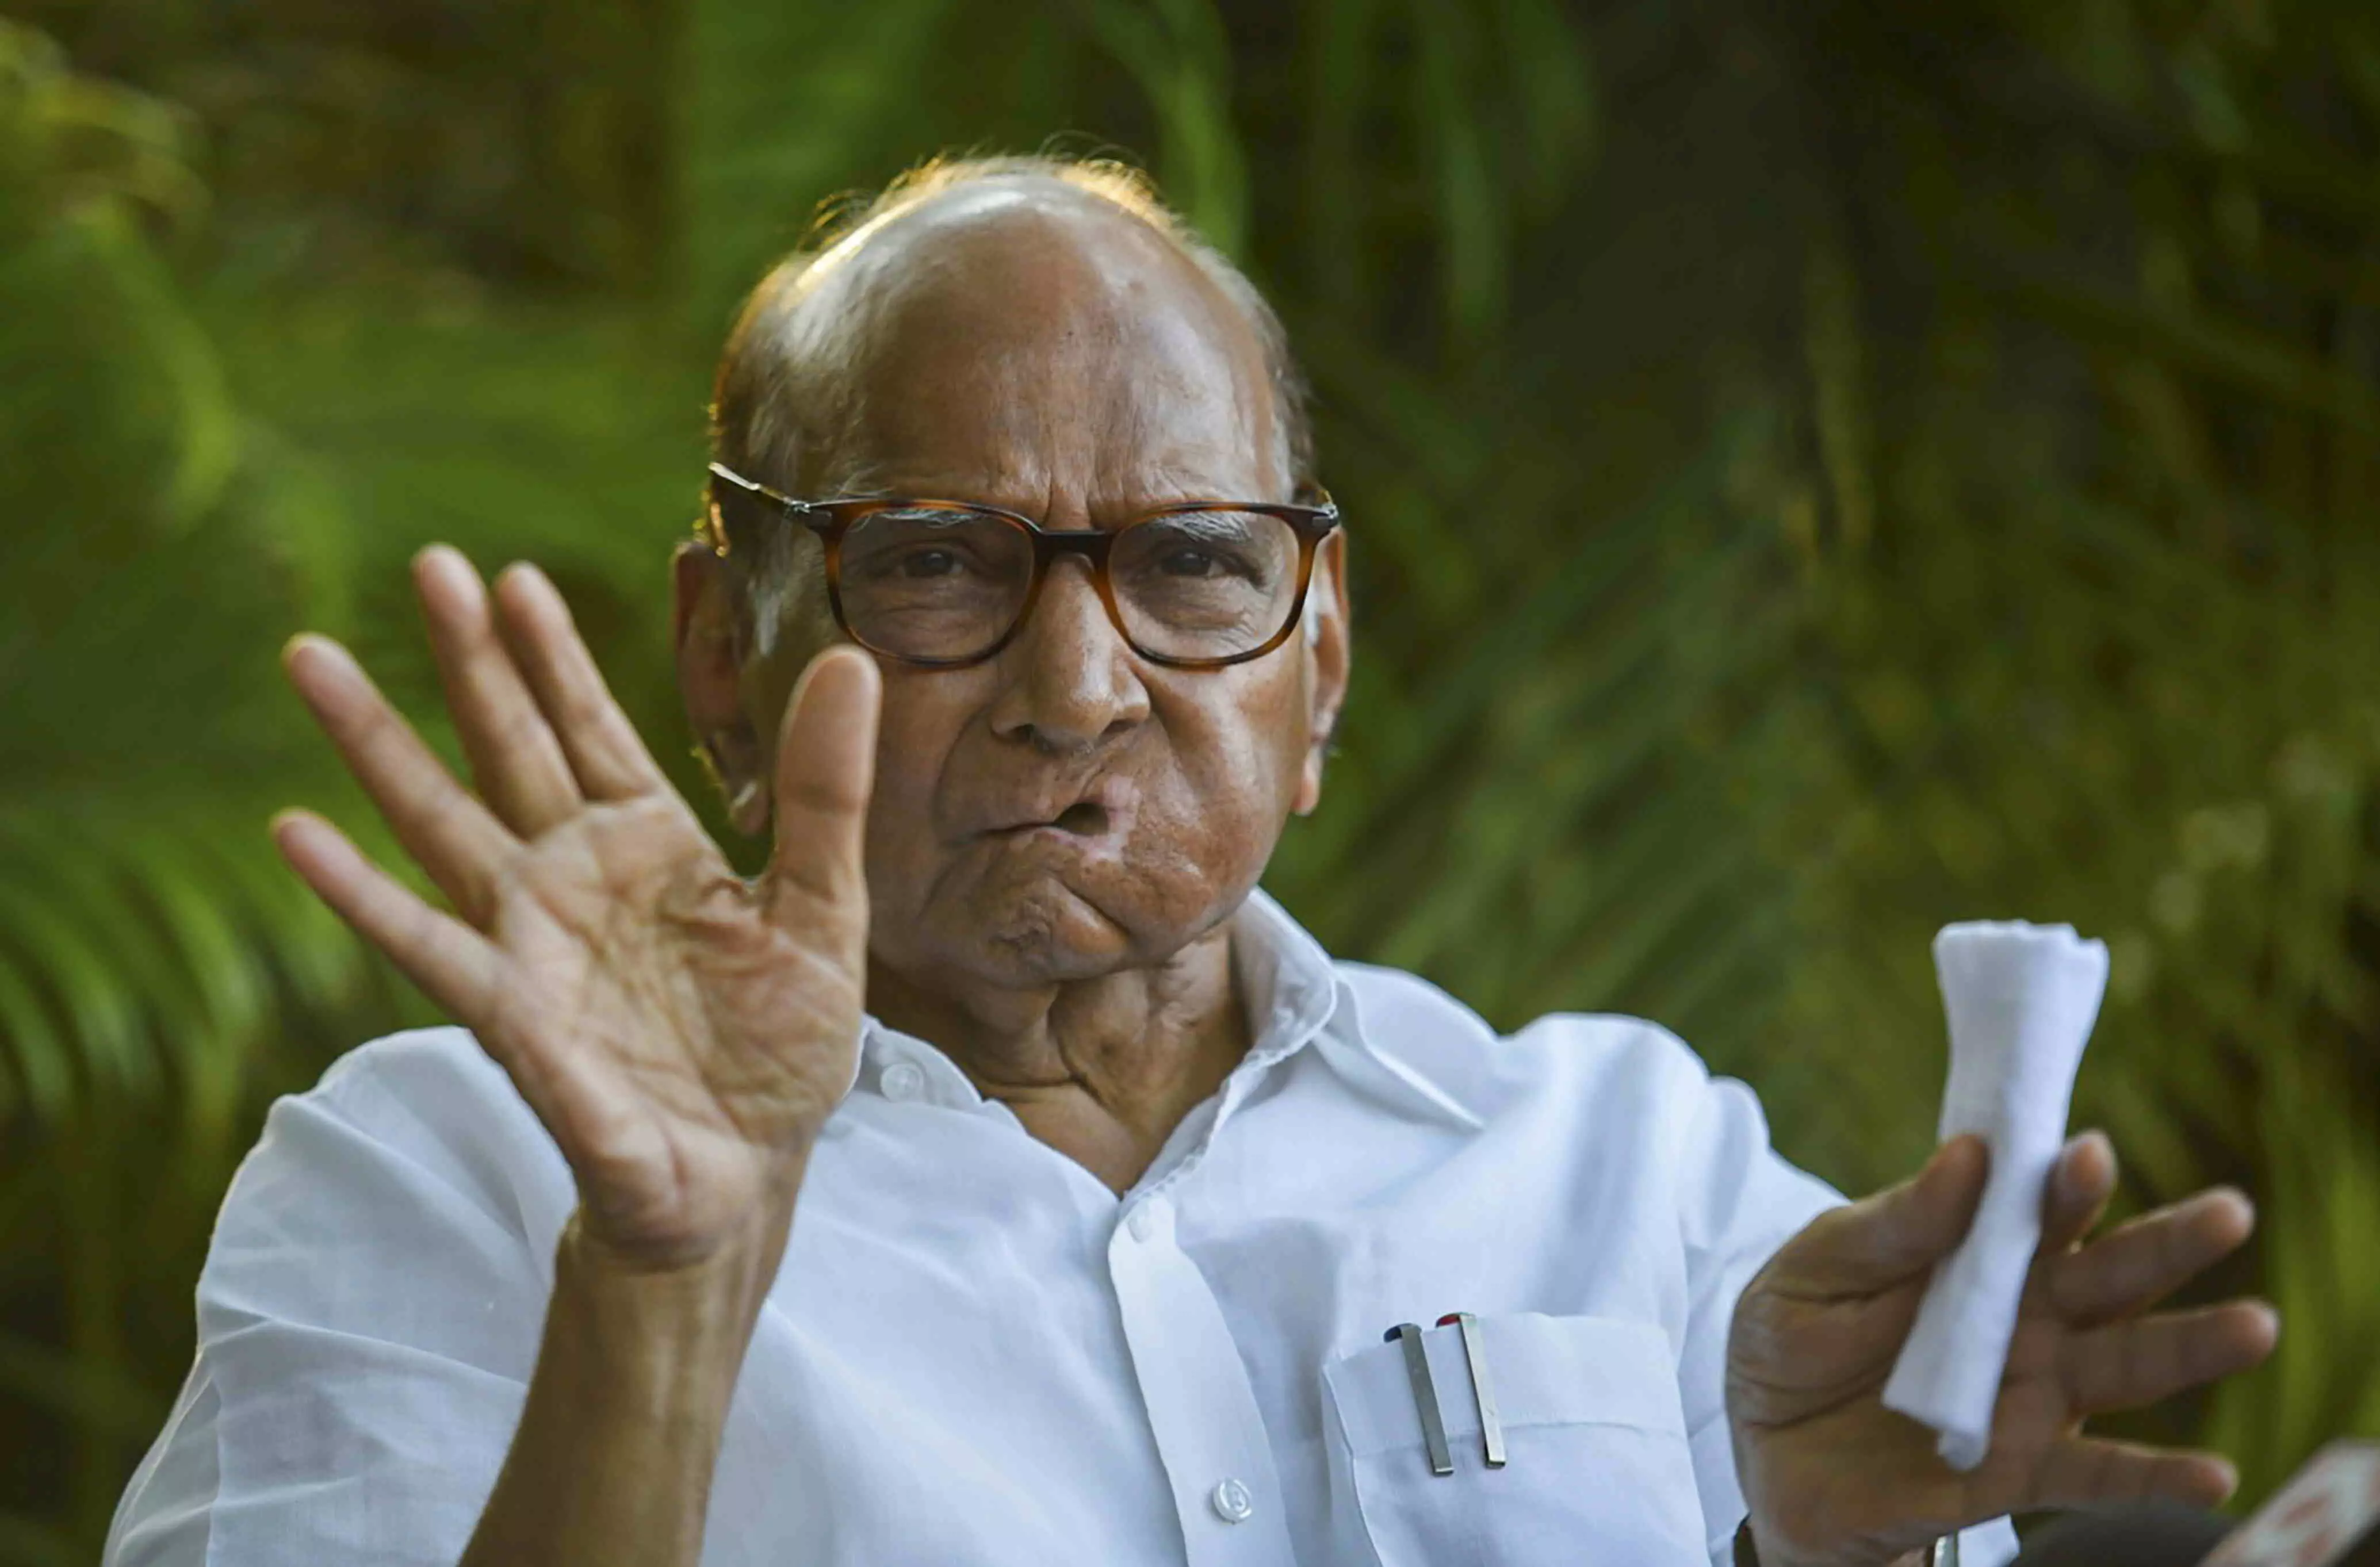 Shah is in power, so should give account of his contribution, not me, says Sharad Pawar